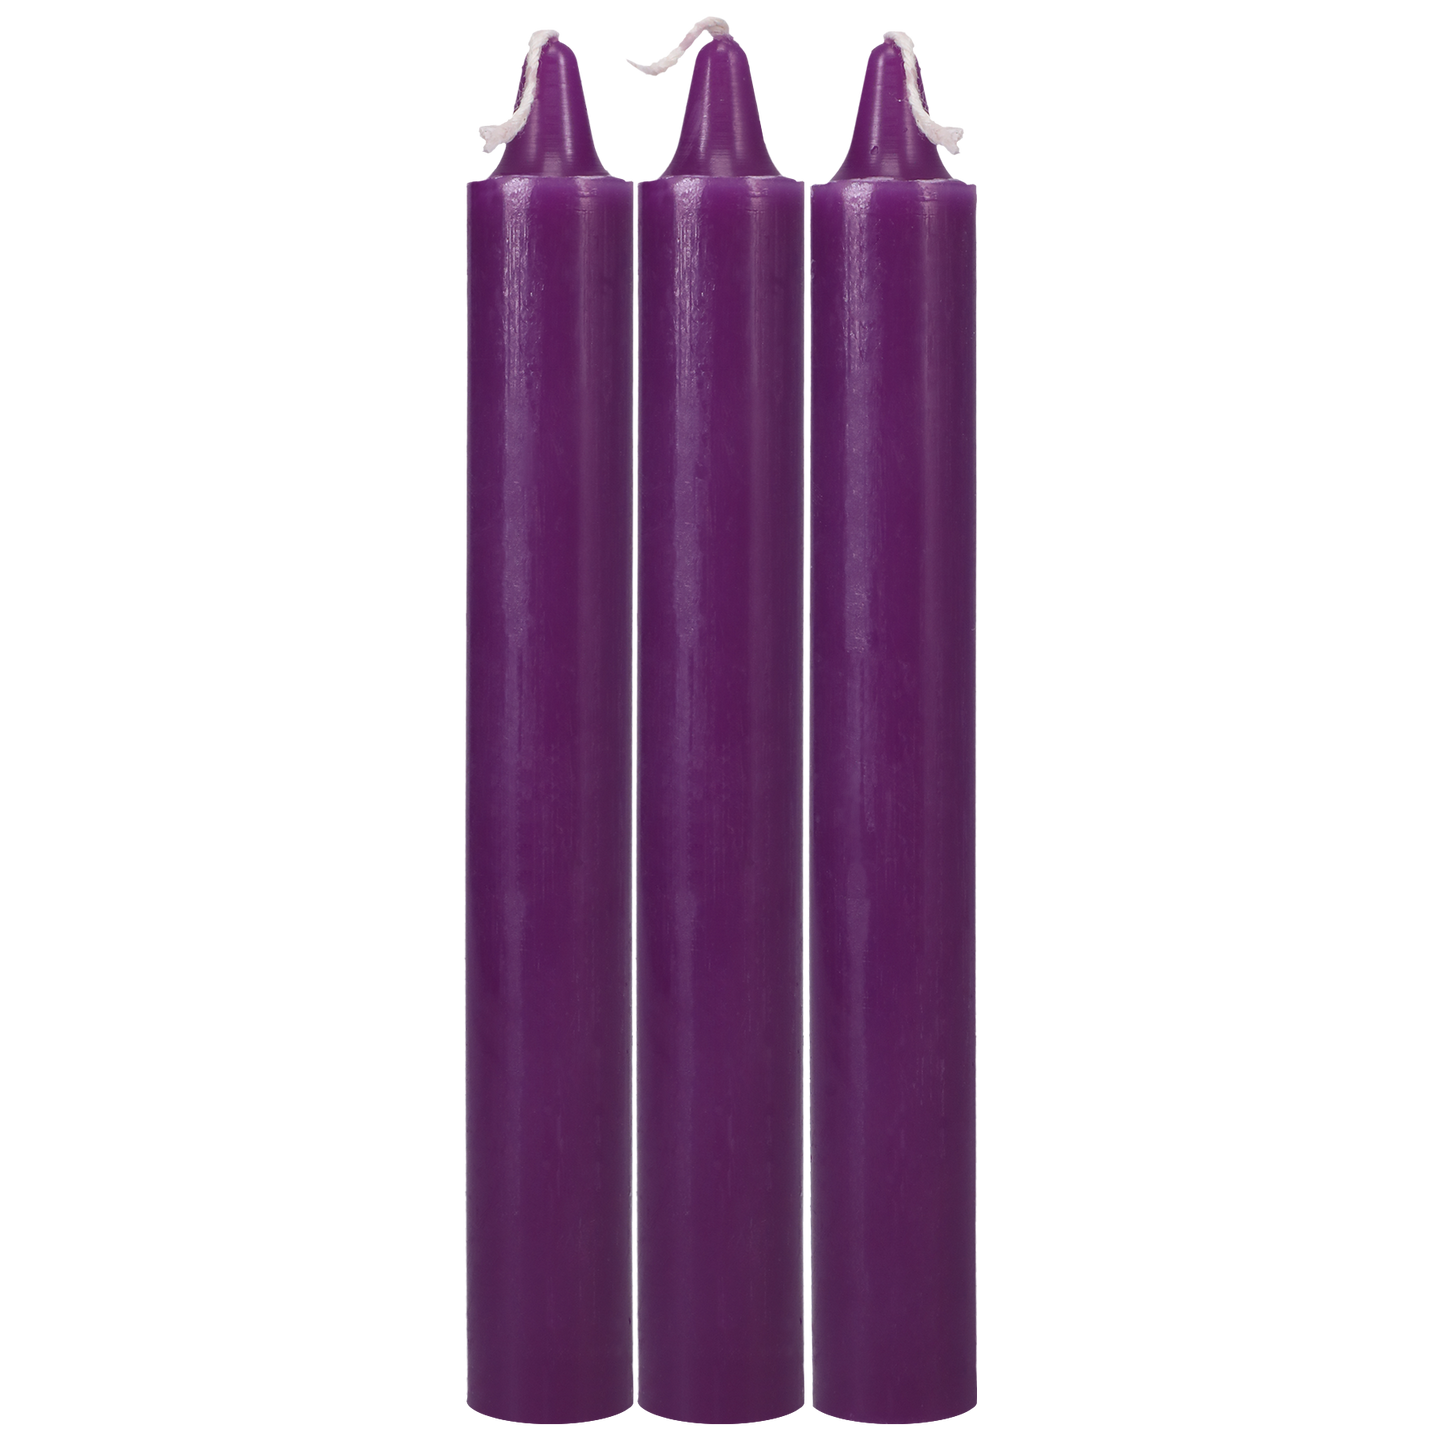 Japanese Drip Candles - Set of 3, Purple - Thorn & Feather